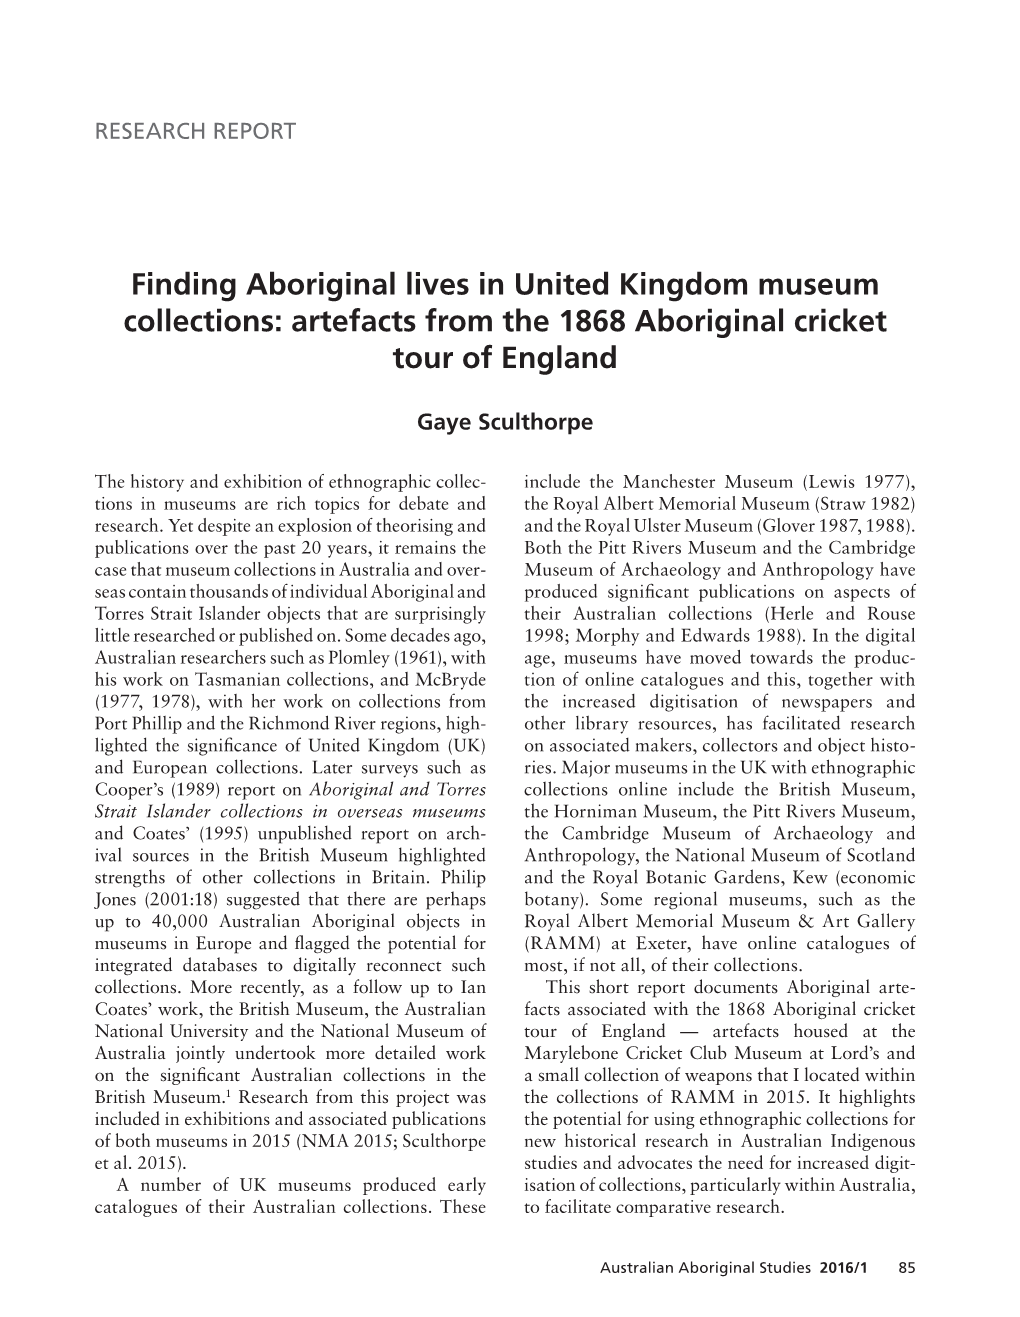 Artefacts from the 1868 Aboriginal Cricket Tour of England